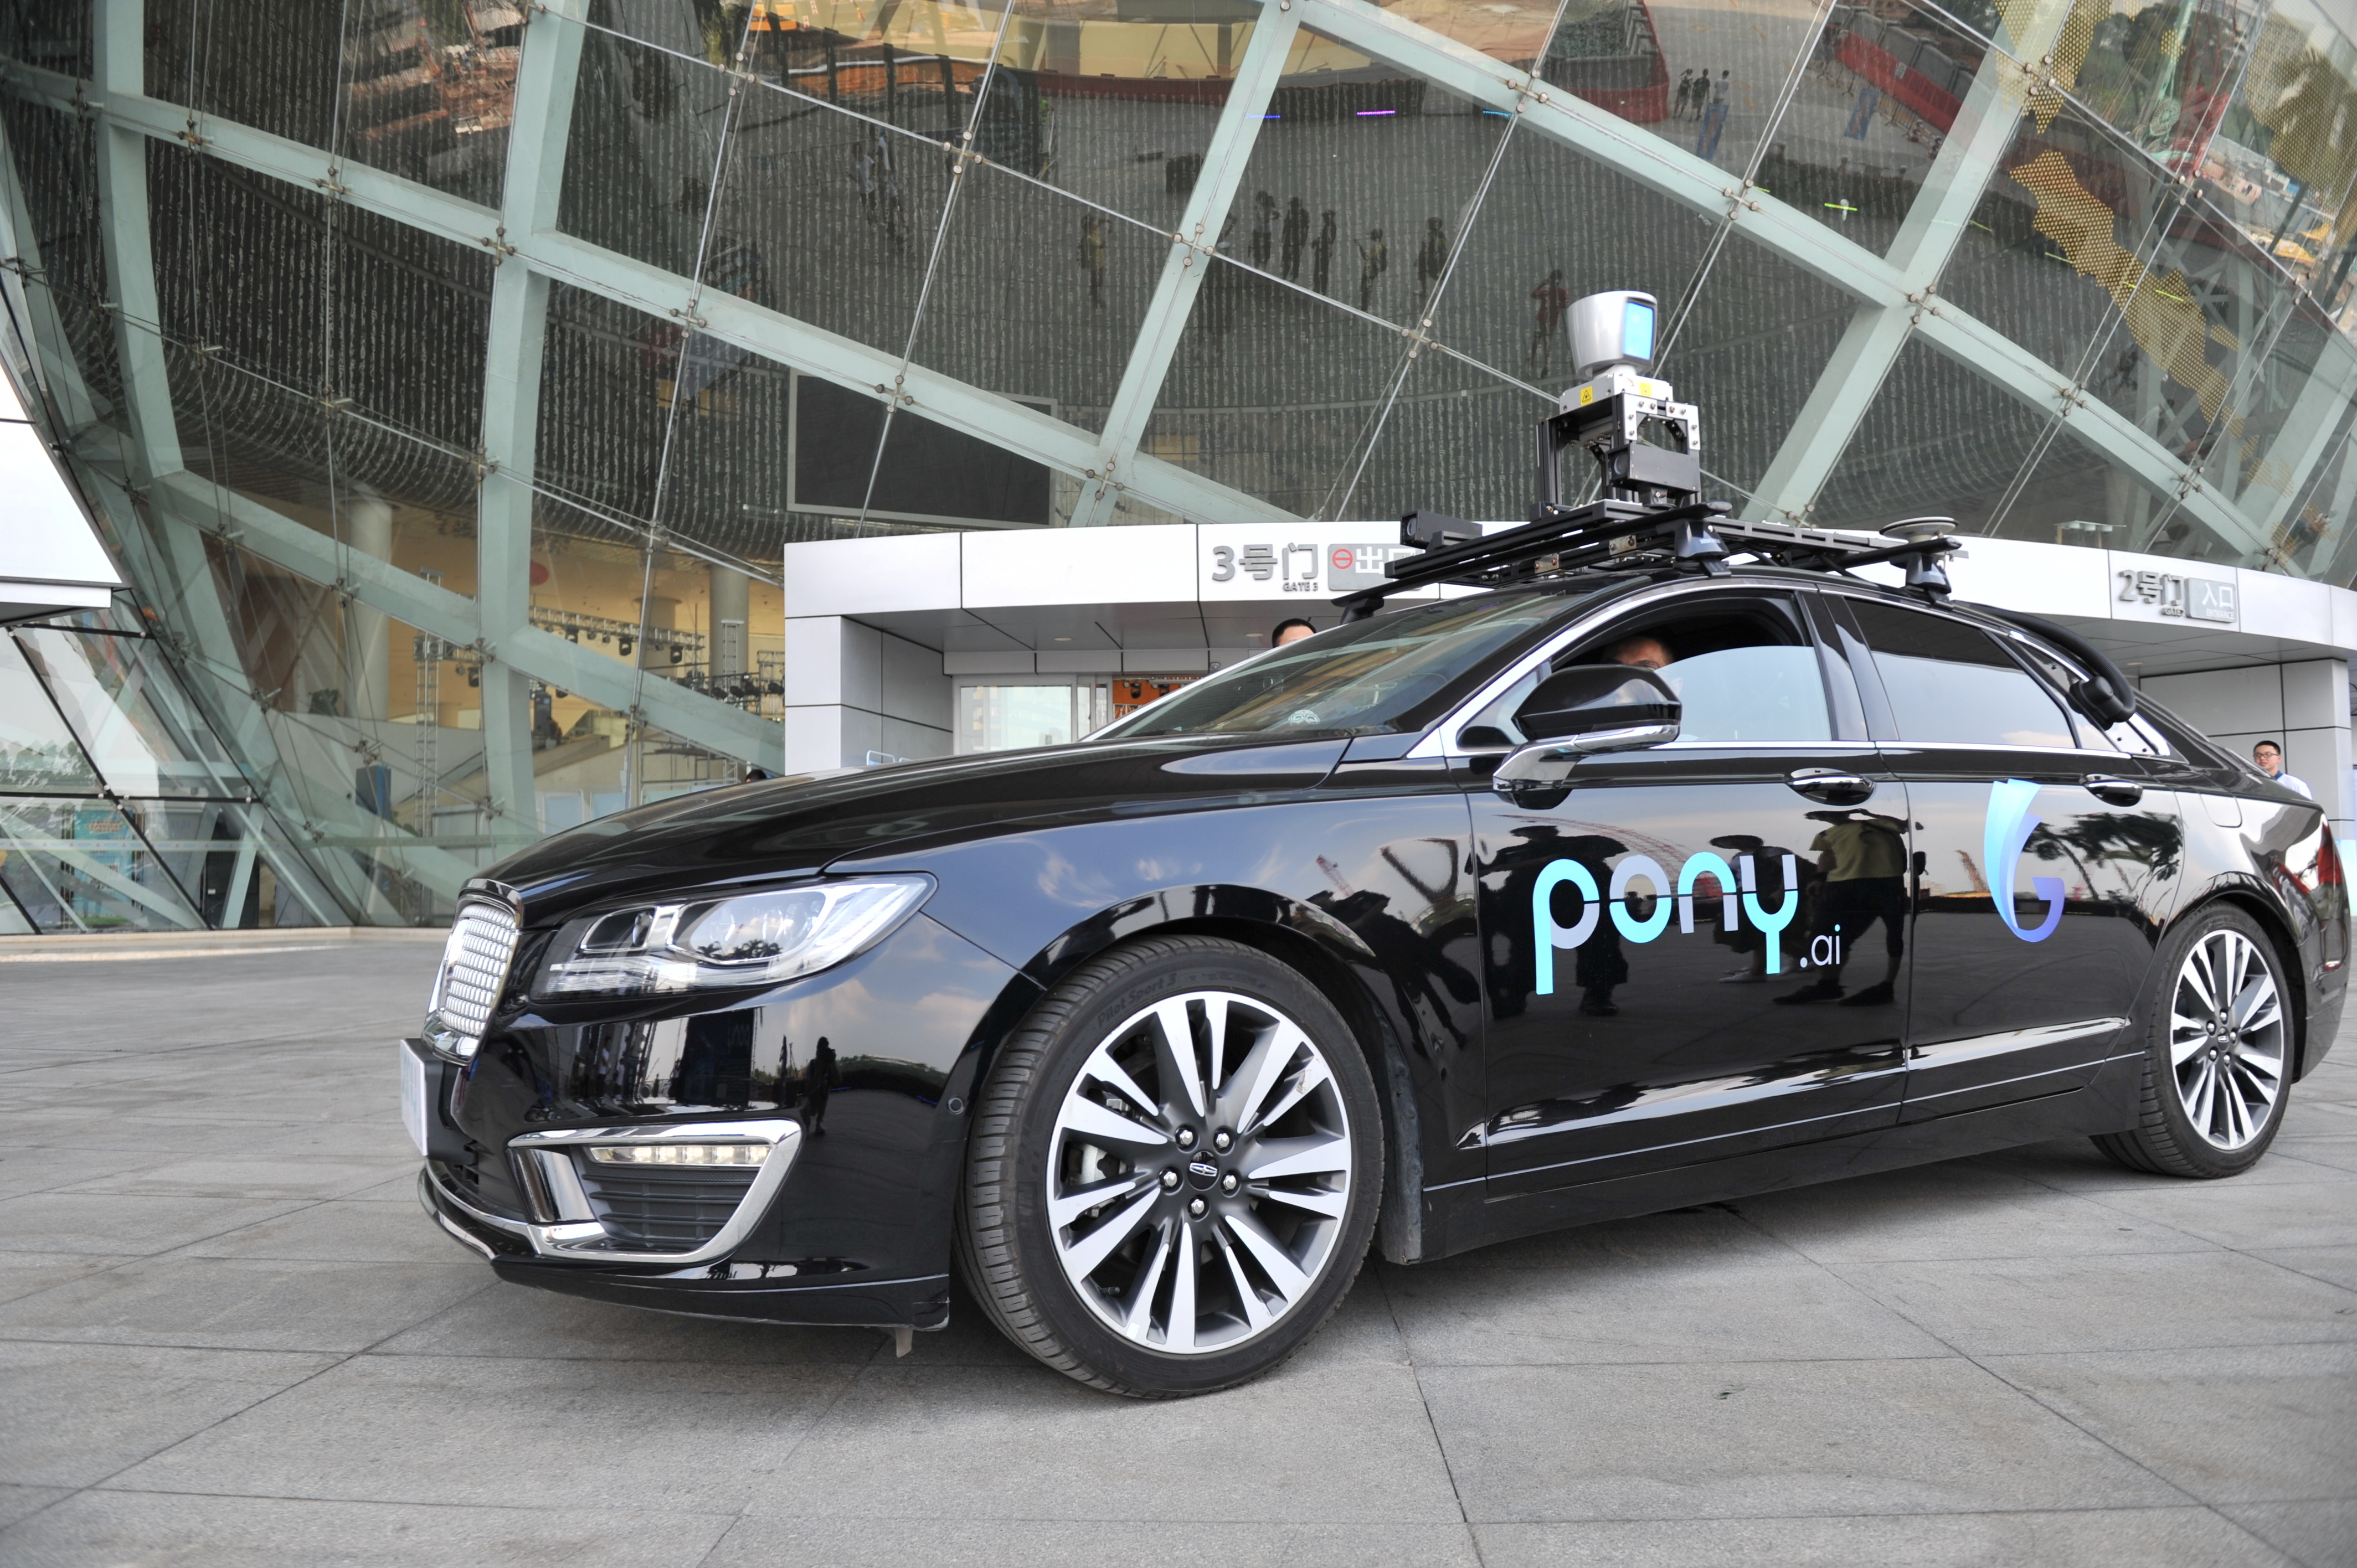 A self-driving car of Pony.ai, a developer of AI-based robot designed for autonomous driving, is on display during an exhibition in Guangzhou on May 19, 2018. (Yang Yaohua—Imaginechina/AP)